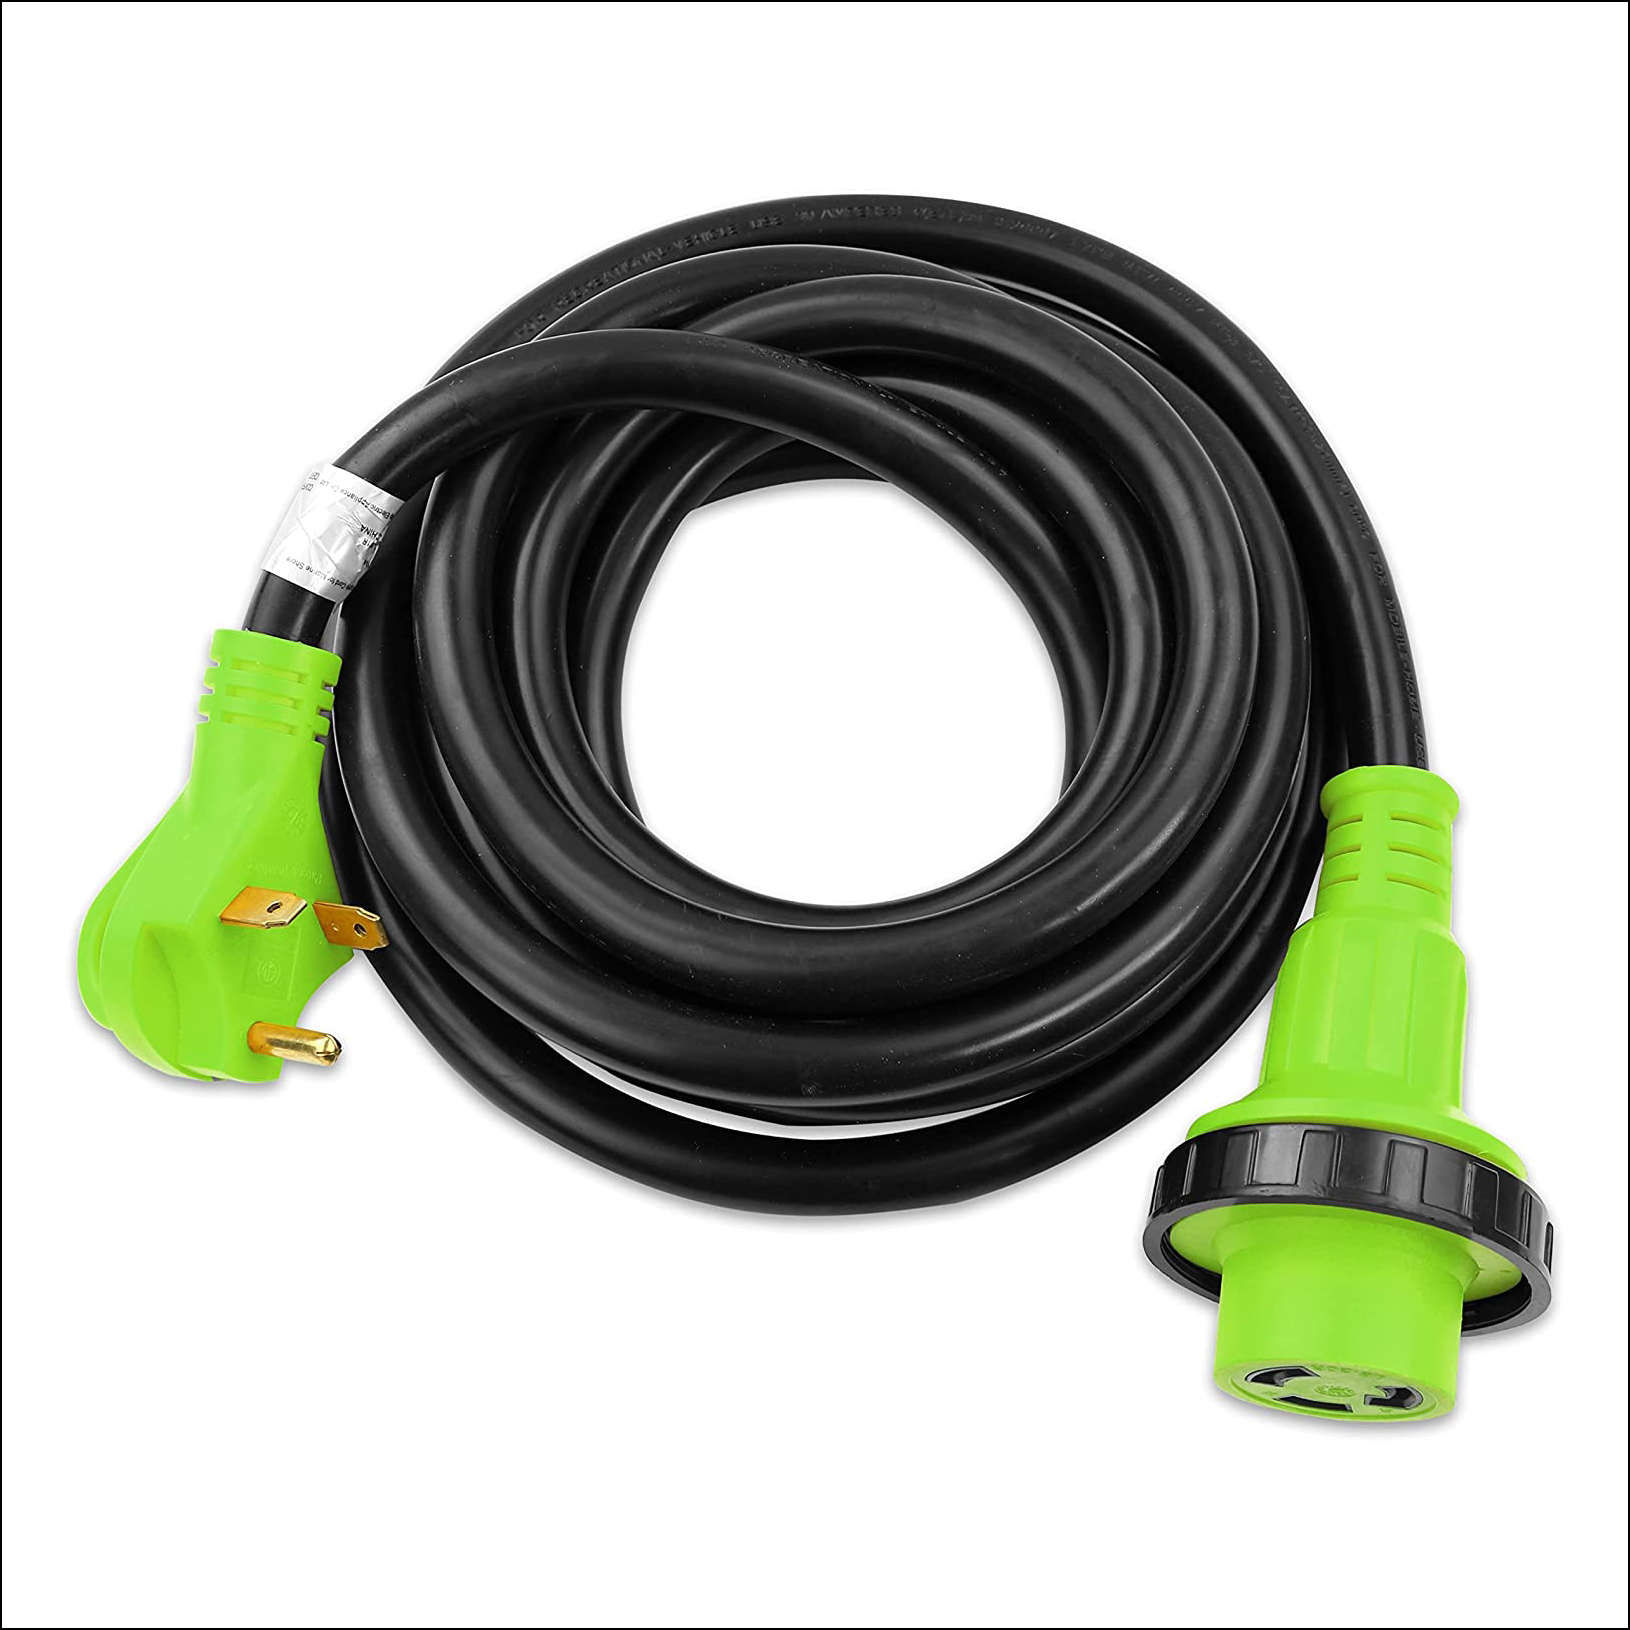 30 Amp Power/Extension Cord